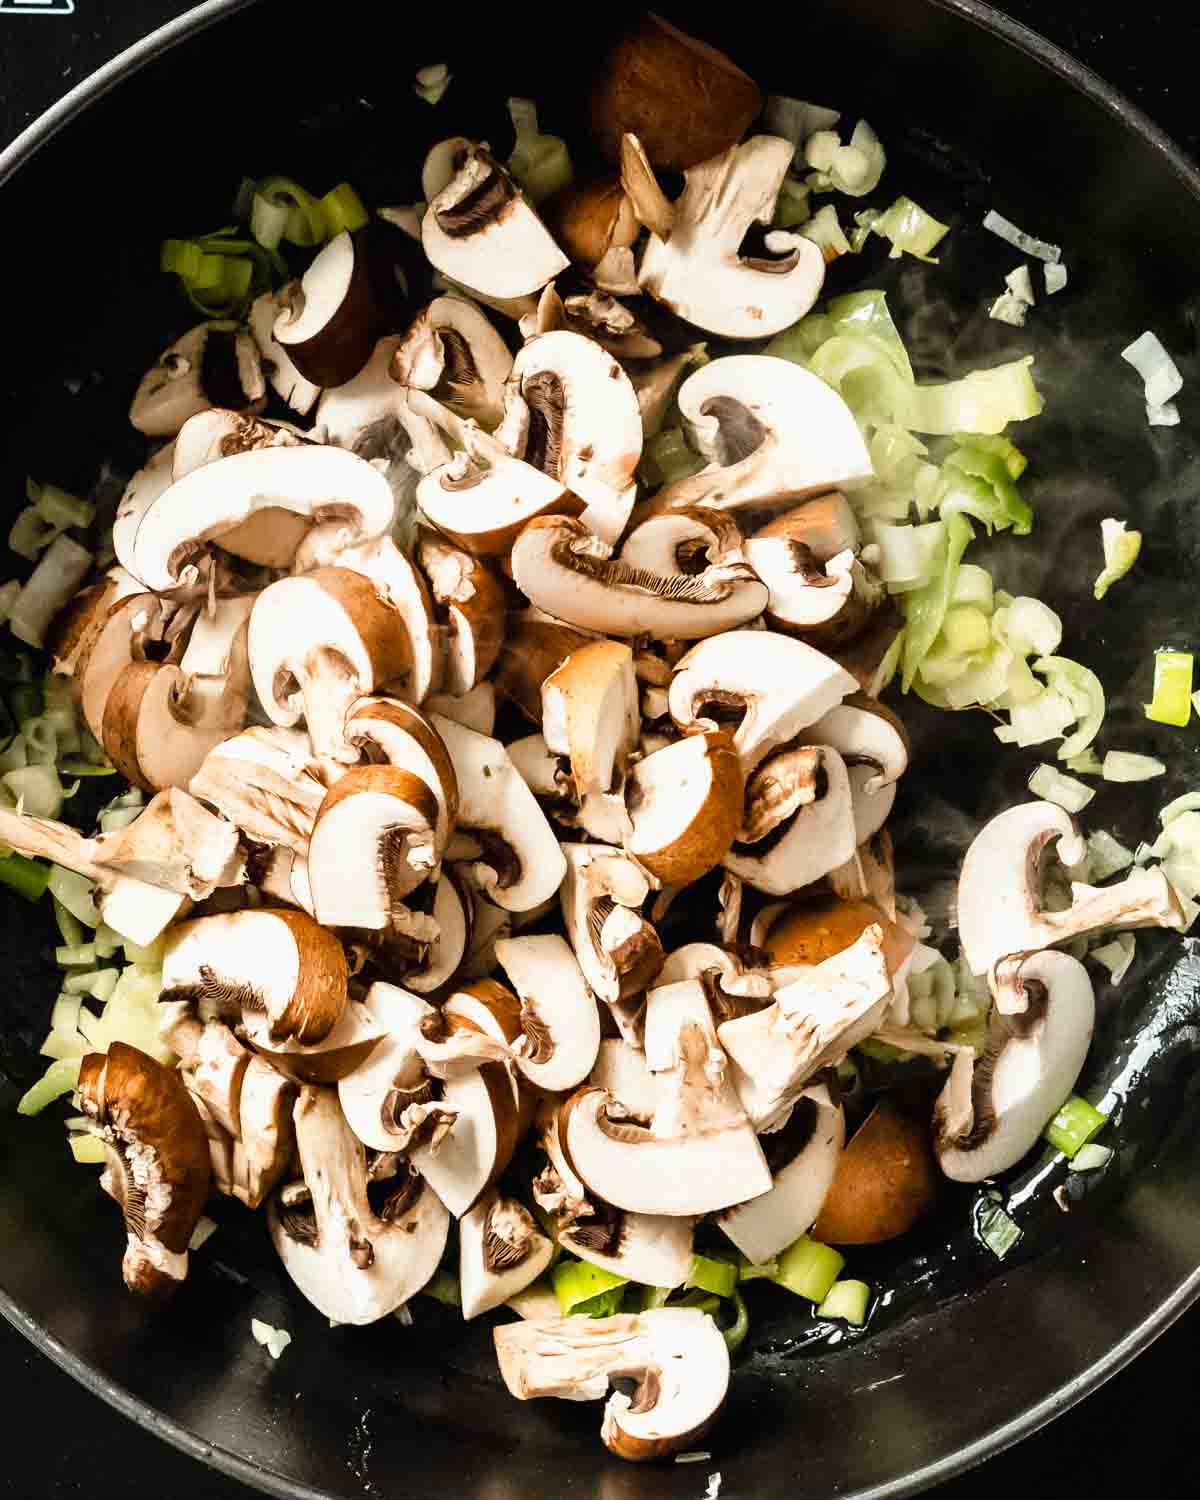 chopped mushrooms addd to the onion garlic mix in the pan.